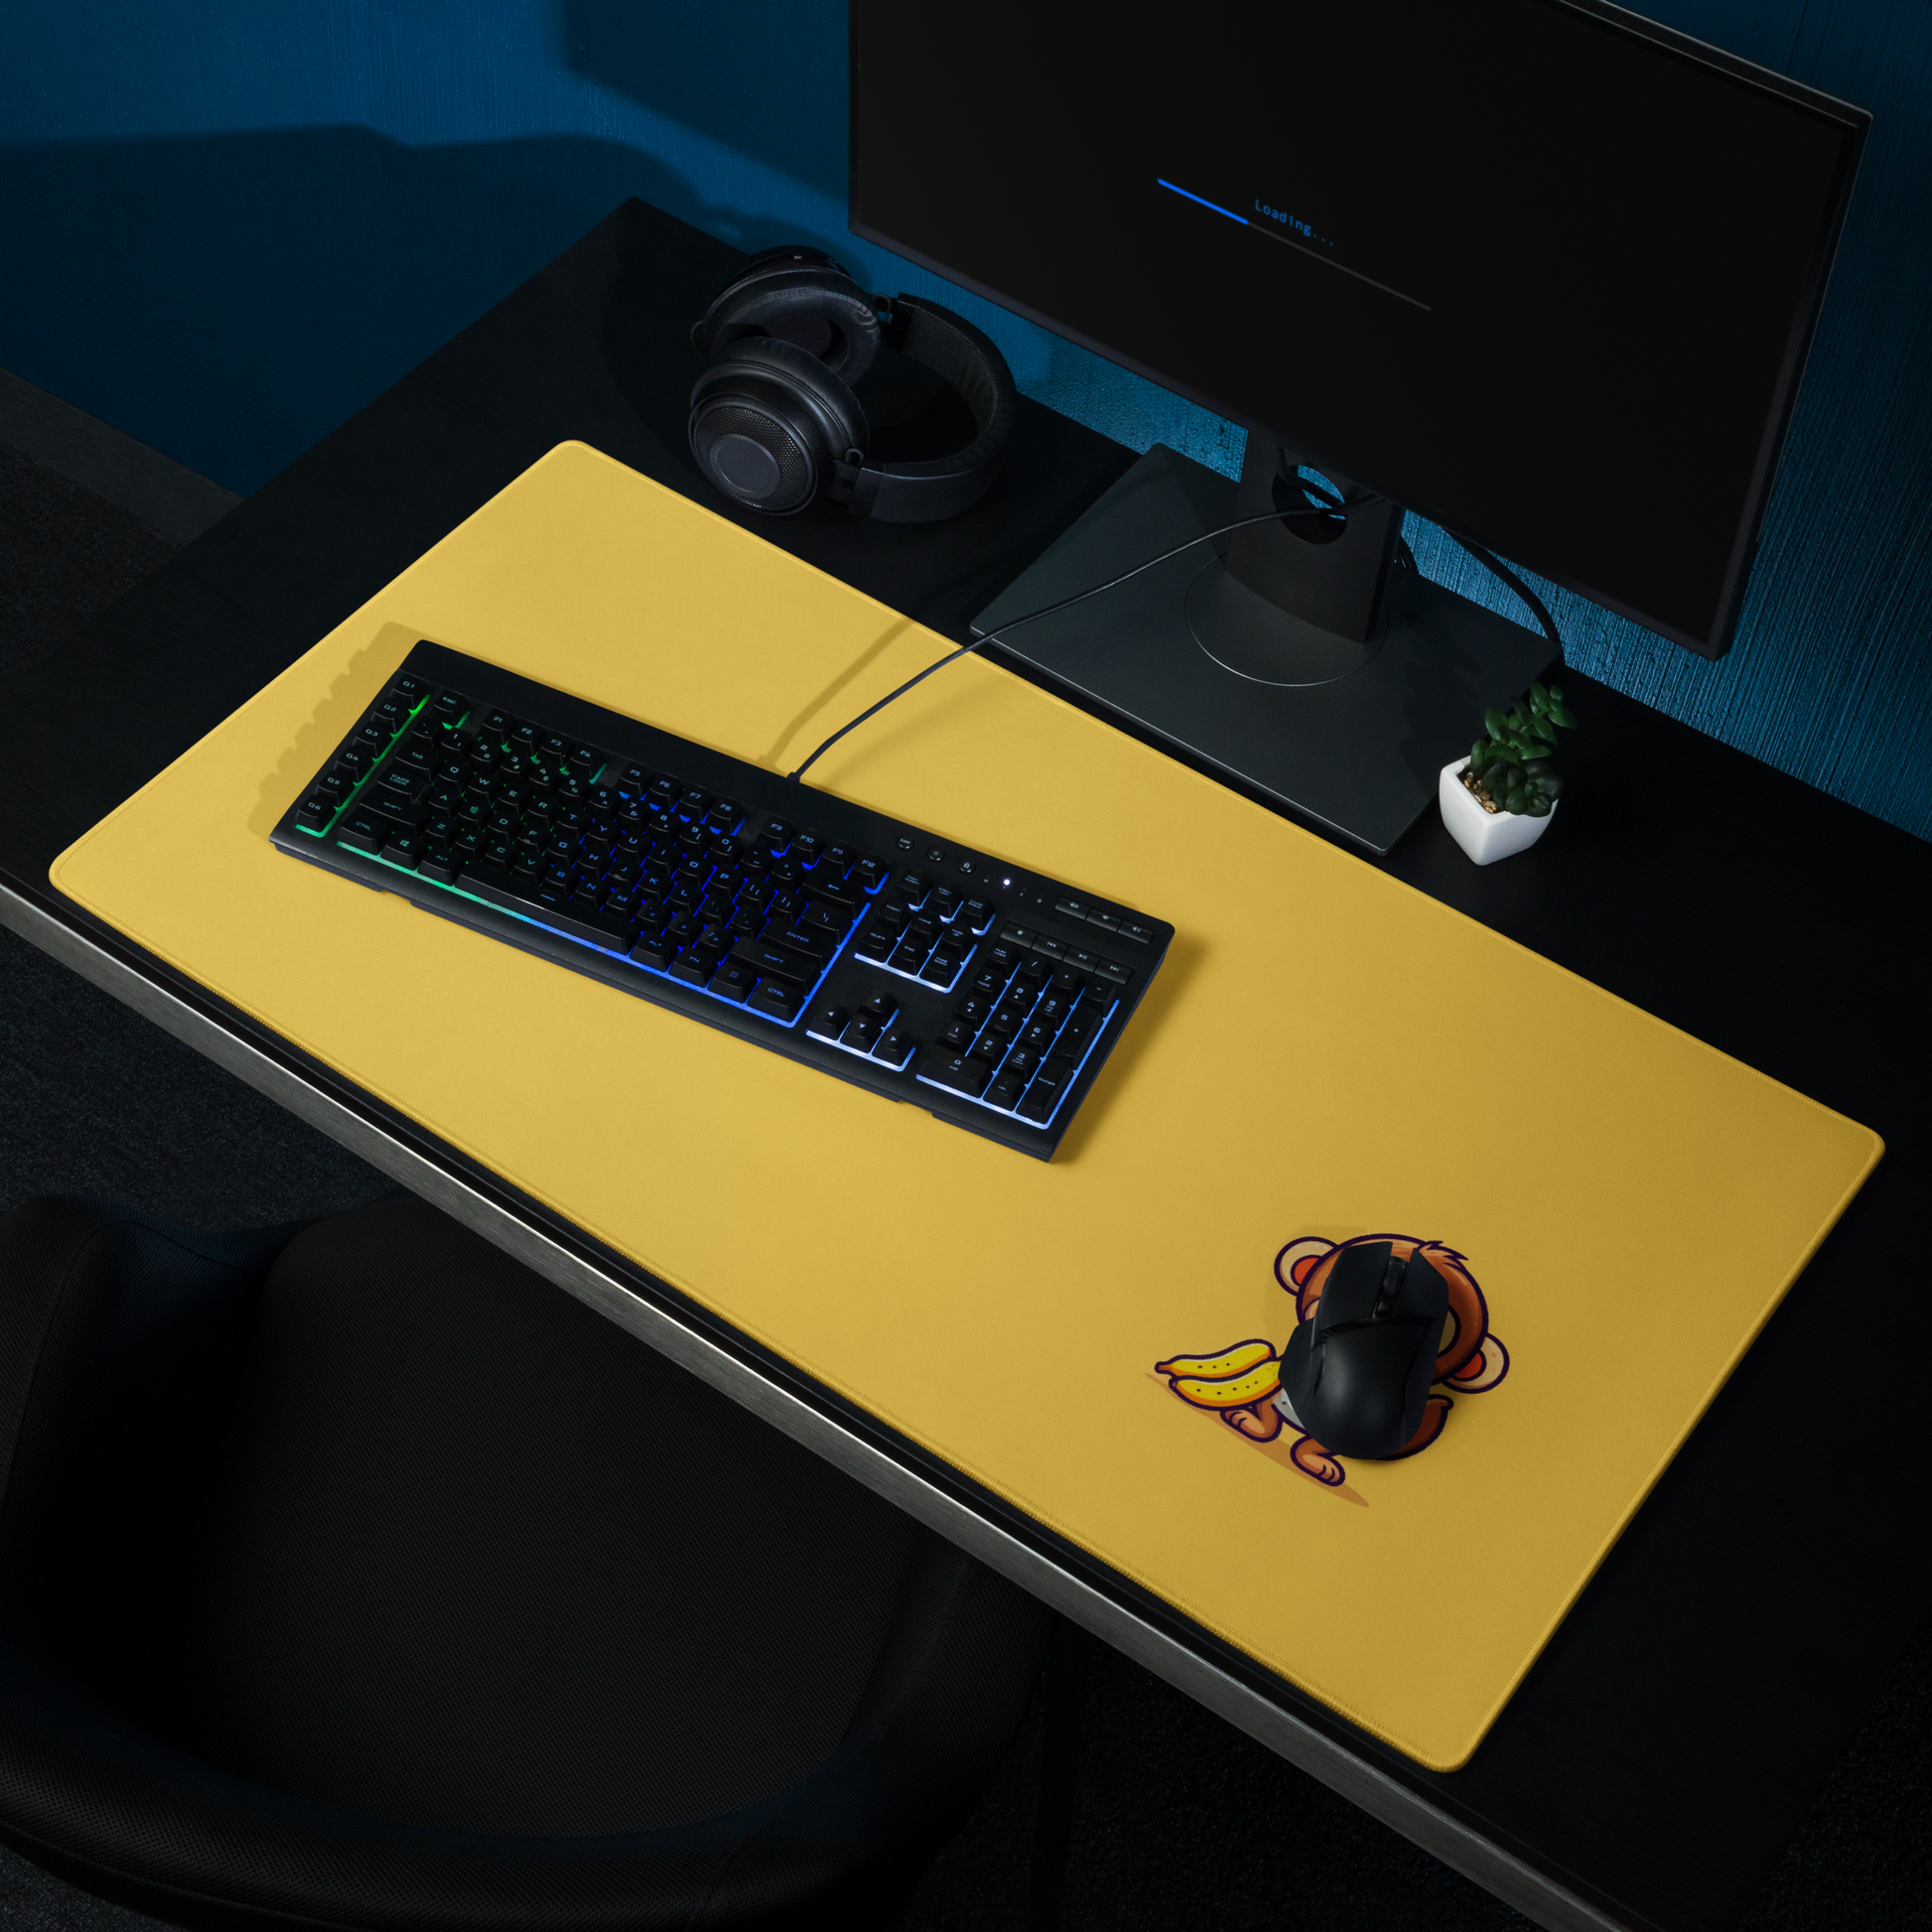 A 36" x 18" desk pad with a cute monkey holding bananas shown on a desk setup. Yellow in color.